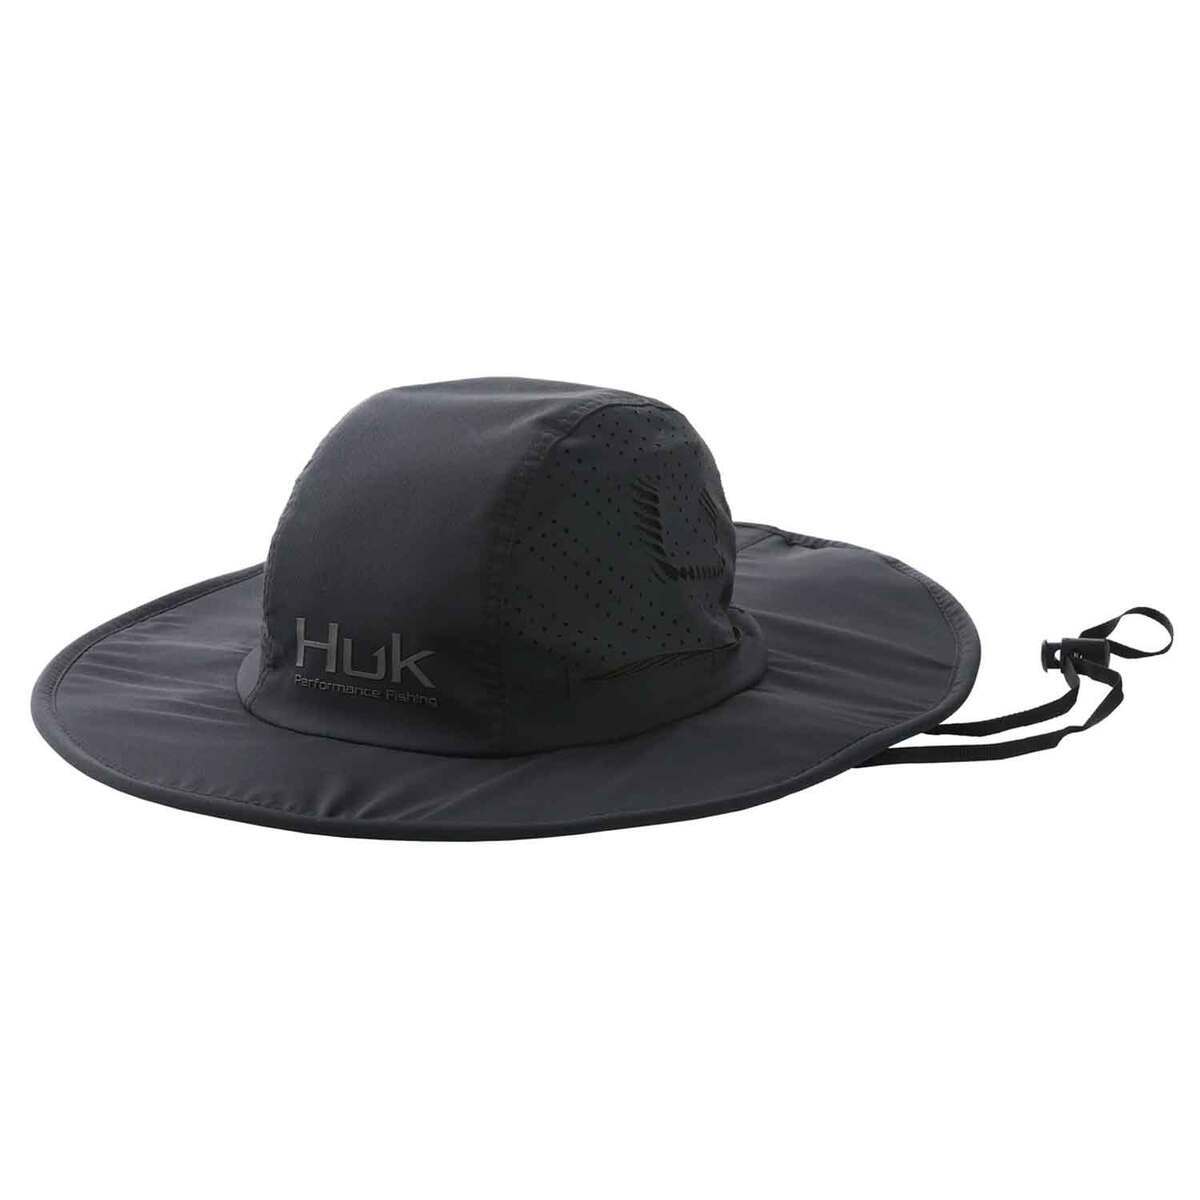 Huk Men's A1A Sun Hat - Black - One Size Fits Most - Black One